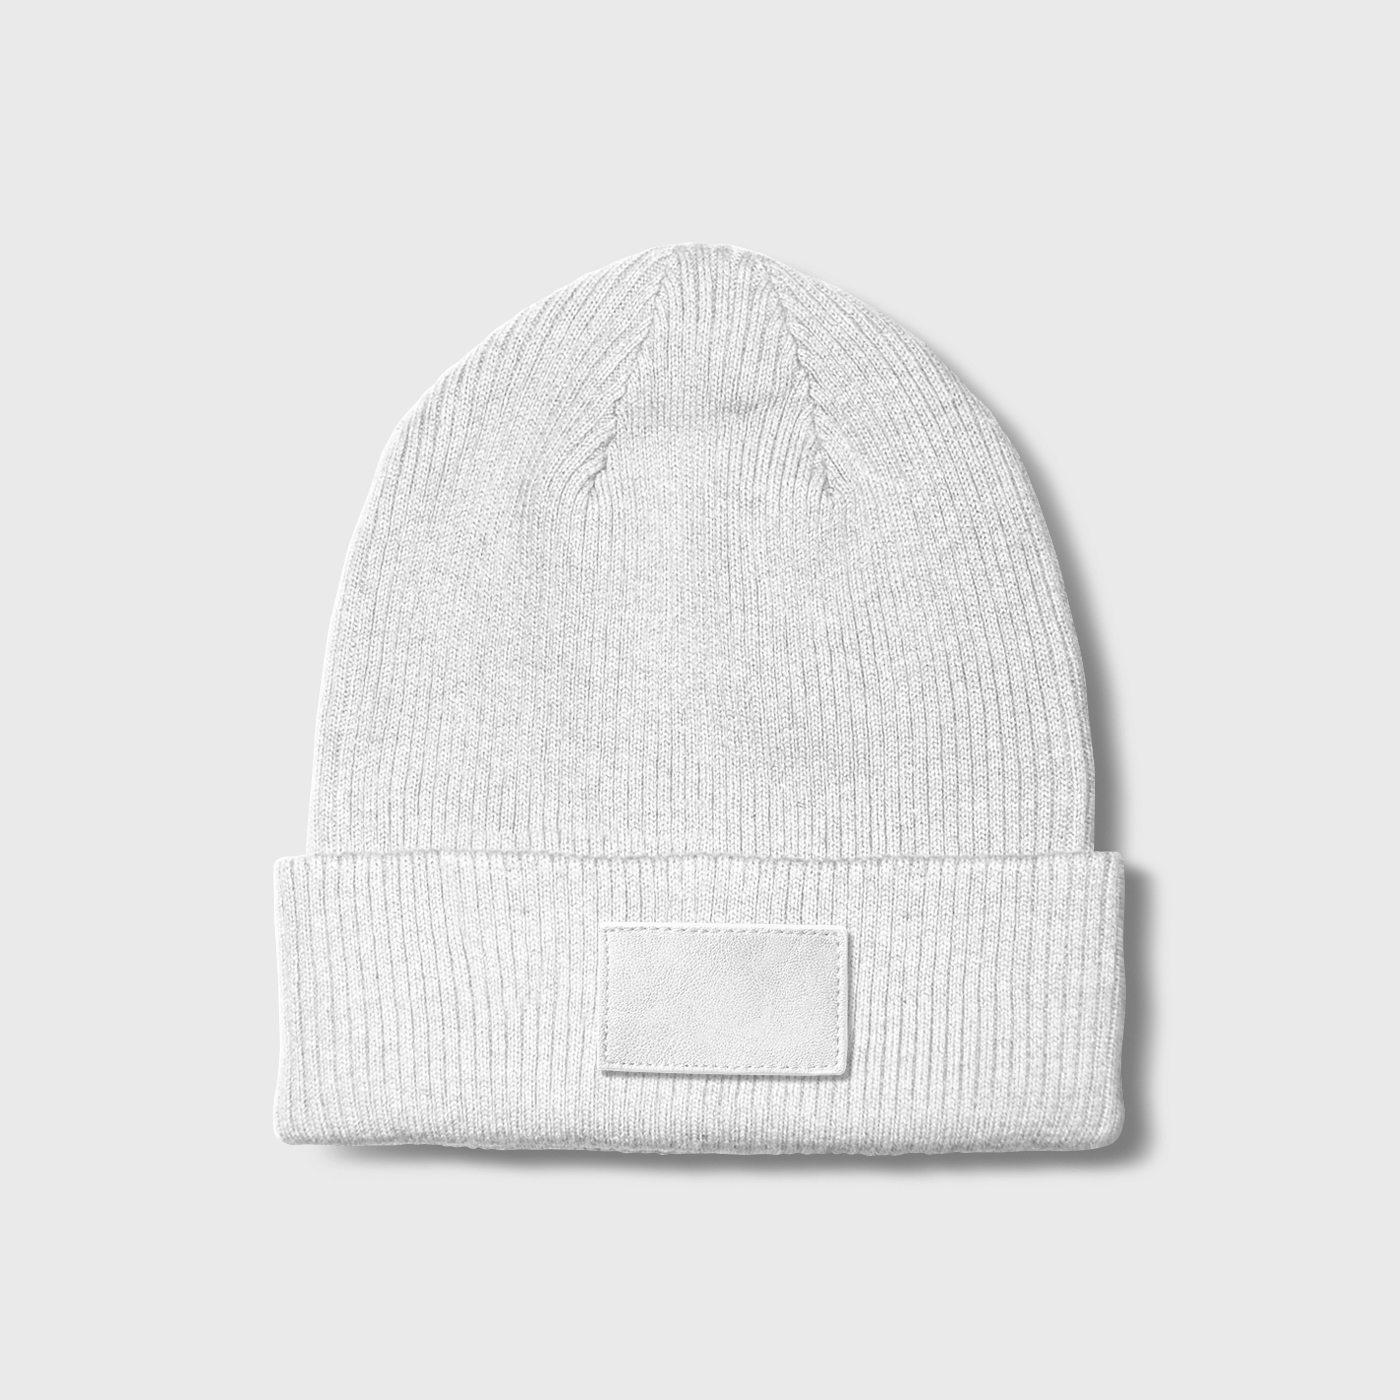 Front View of a Labeled Beanie Mockup FREE PSD